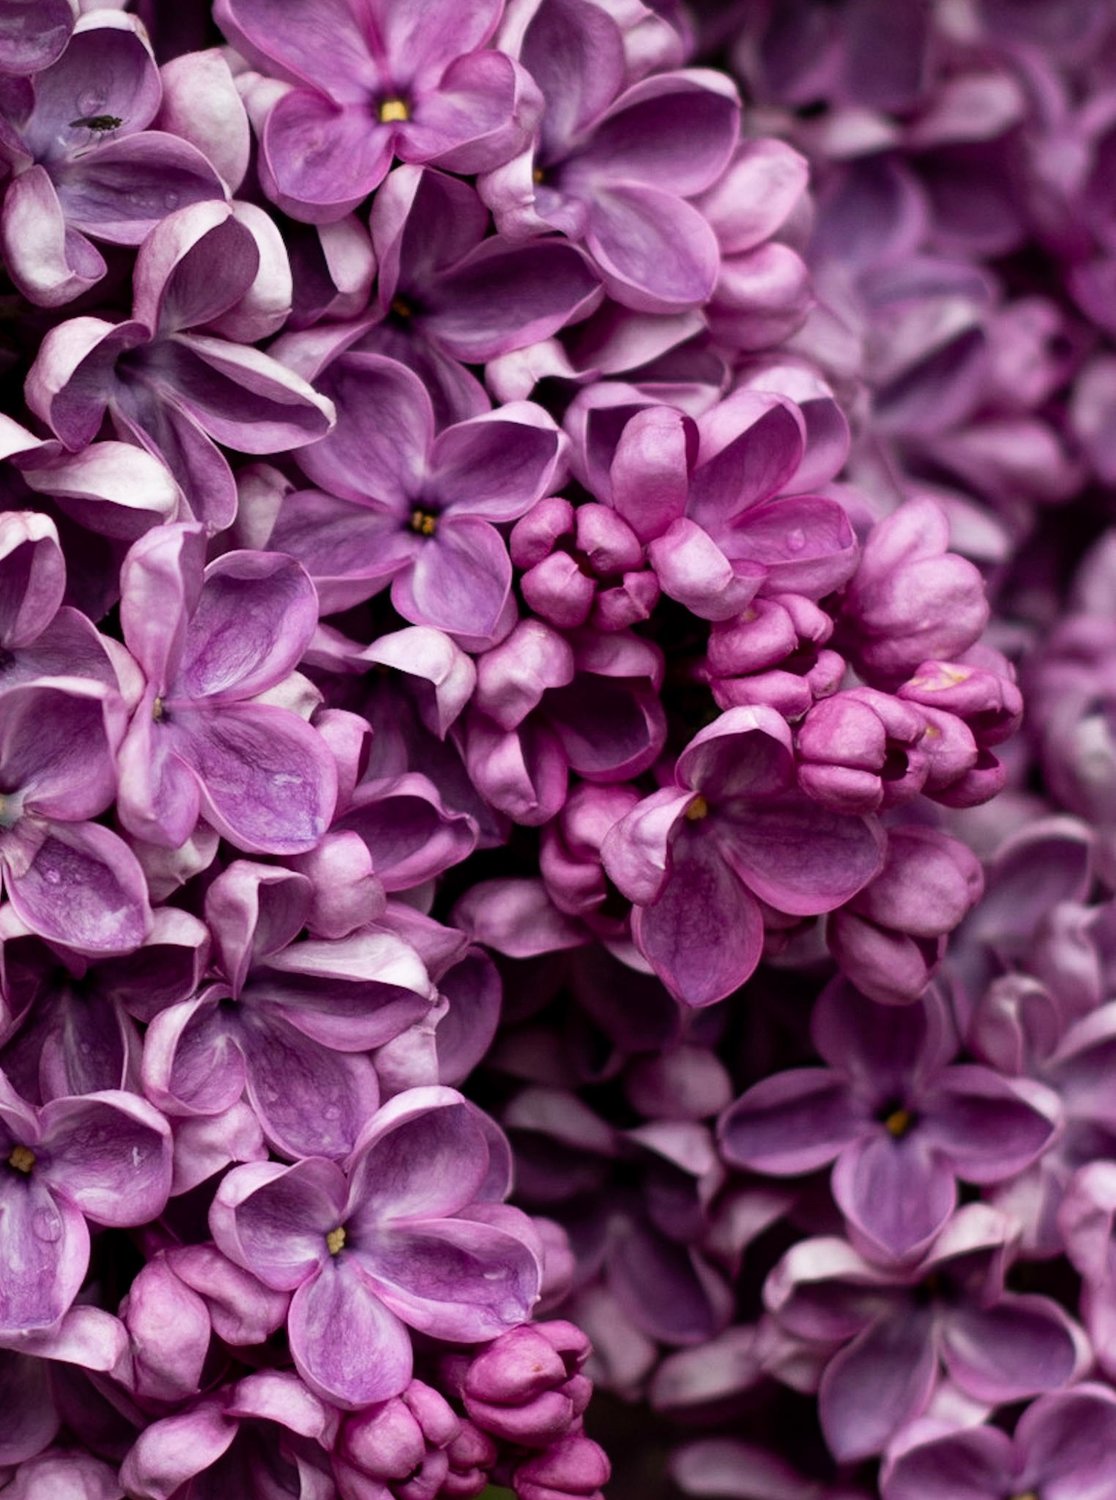 When do lilacs bloom? I actually don't know—but something about them makes me think of spring.